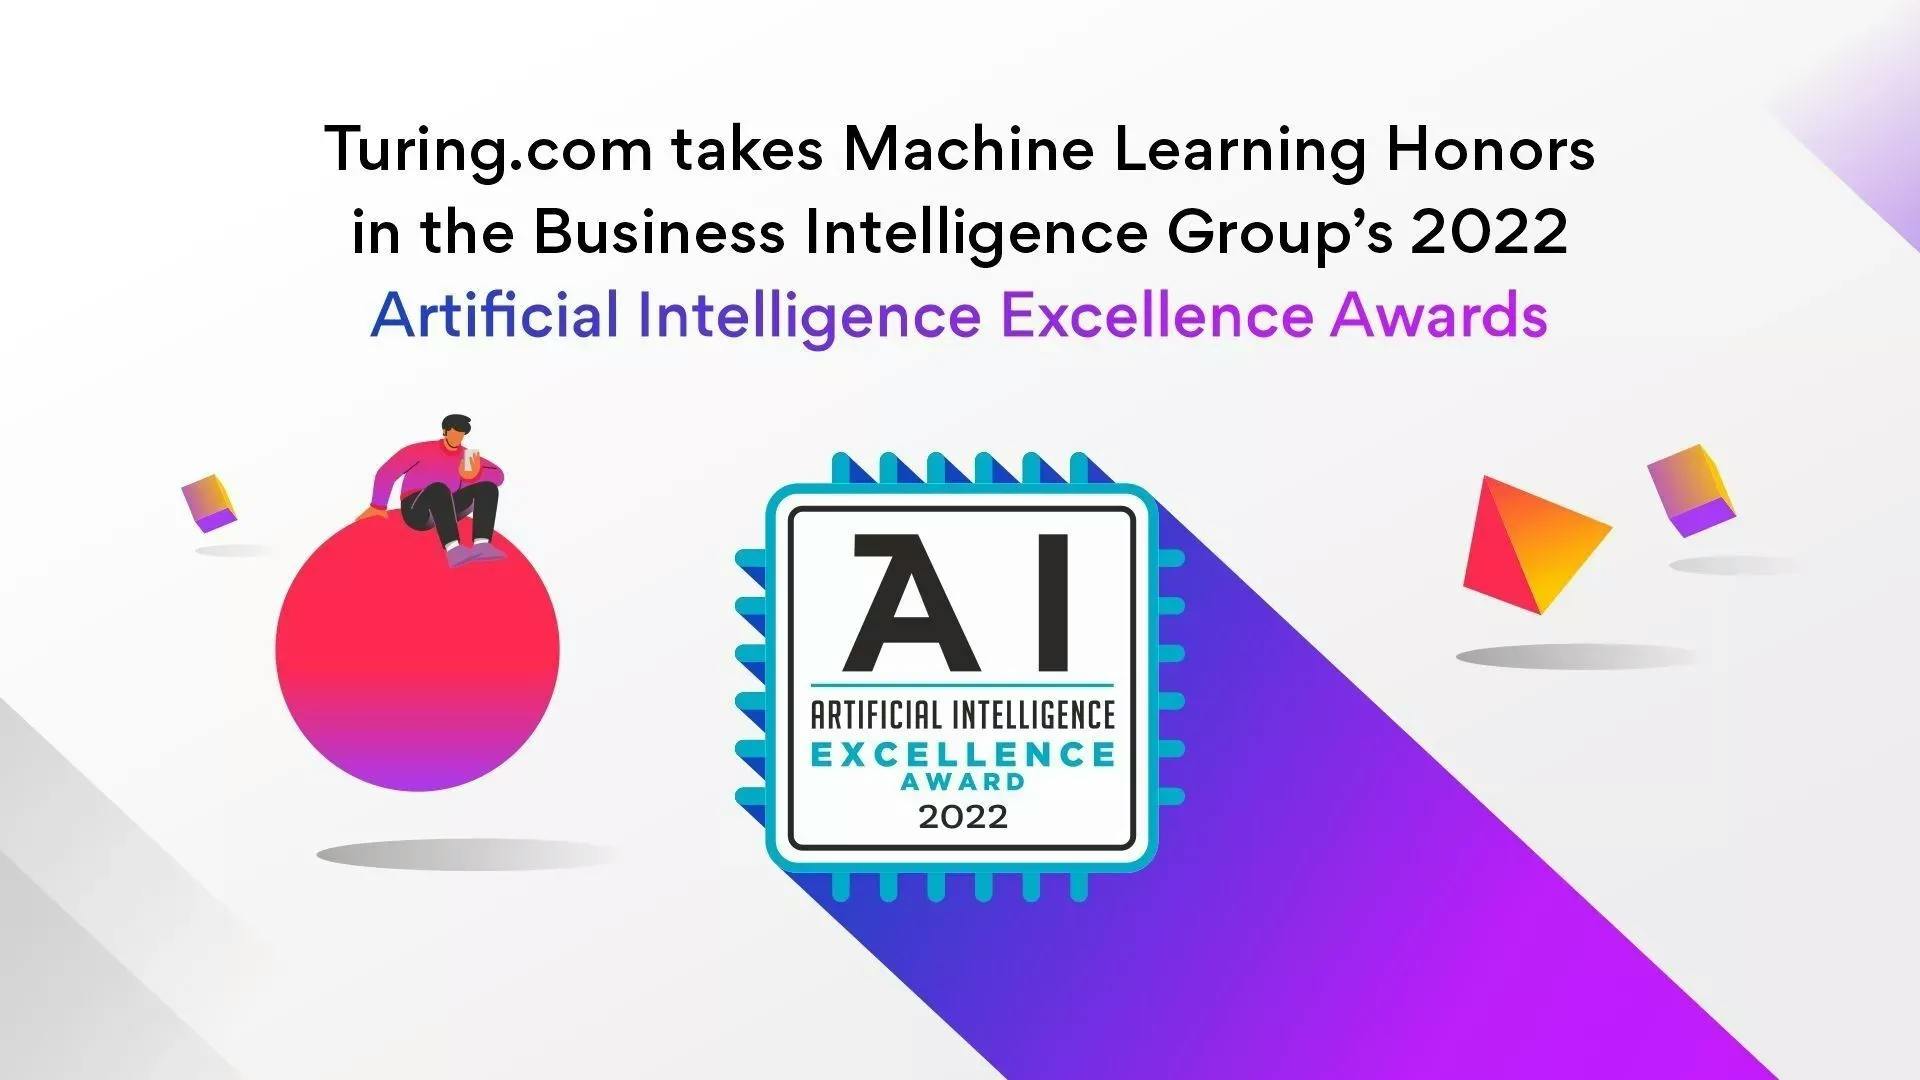 Turing takes Machine Learning Honors in the Business Intelligence Group’s 2022 Artificial Intelligence Excellence Awards